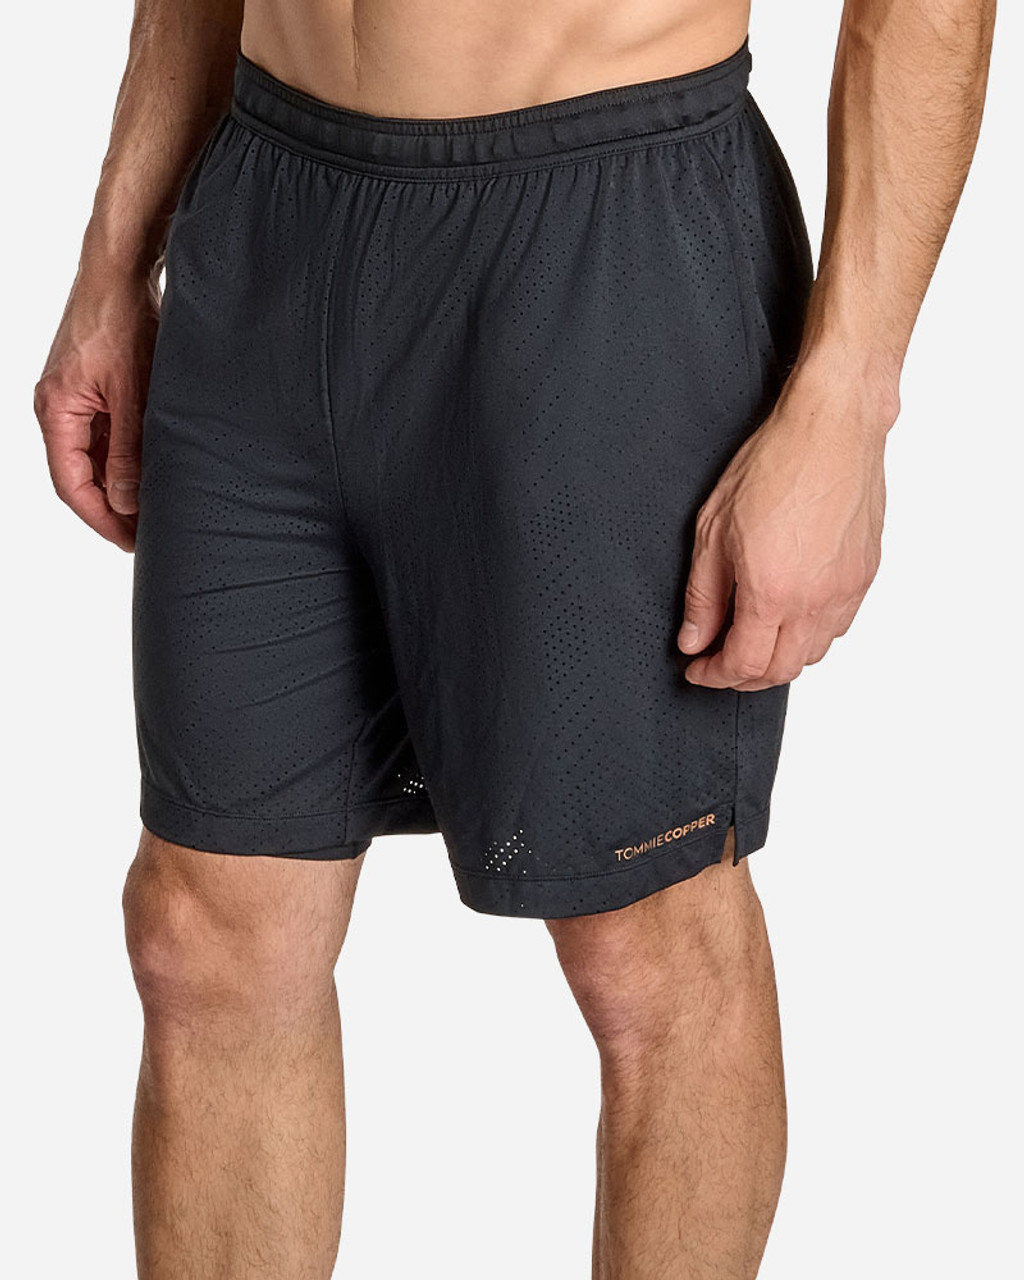 Tommie Copper Men's Compression Fit Running Shorts